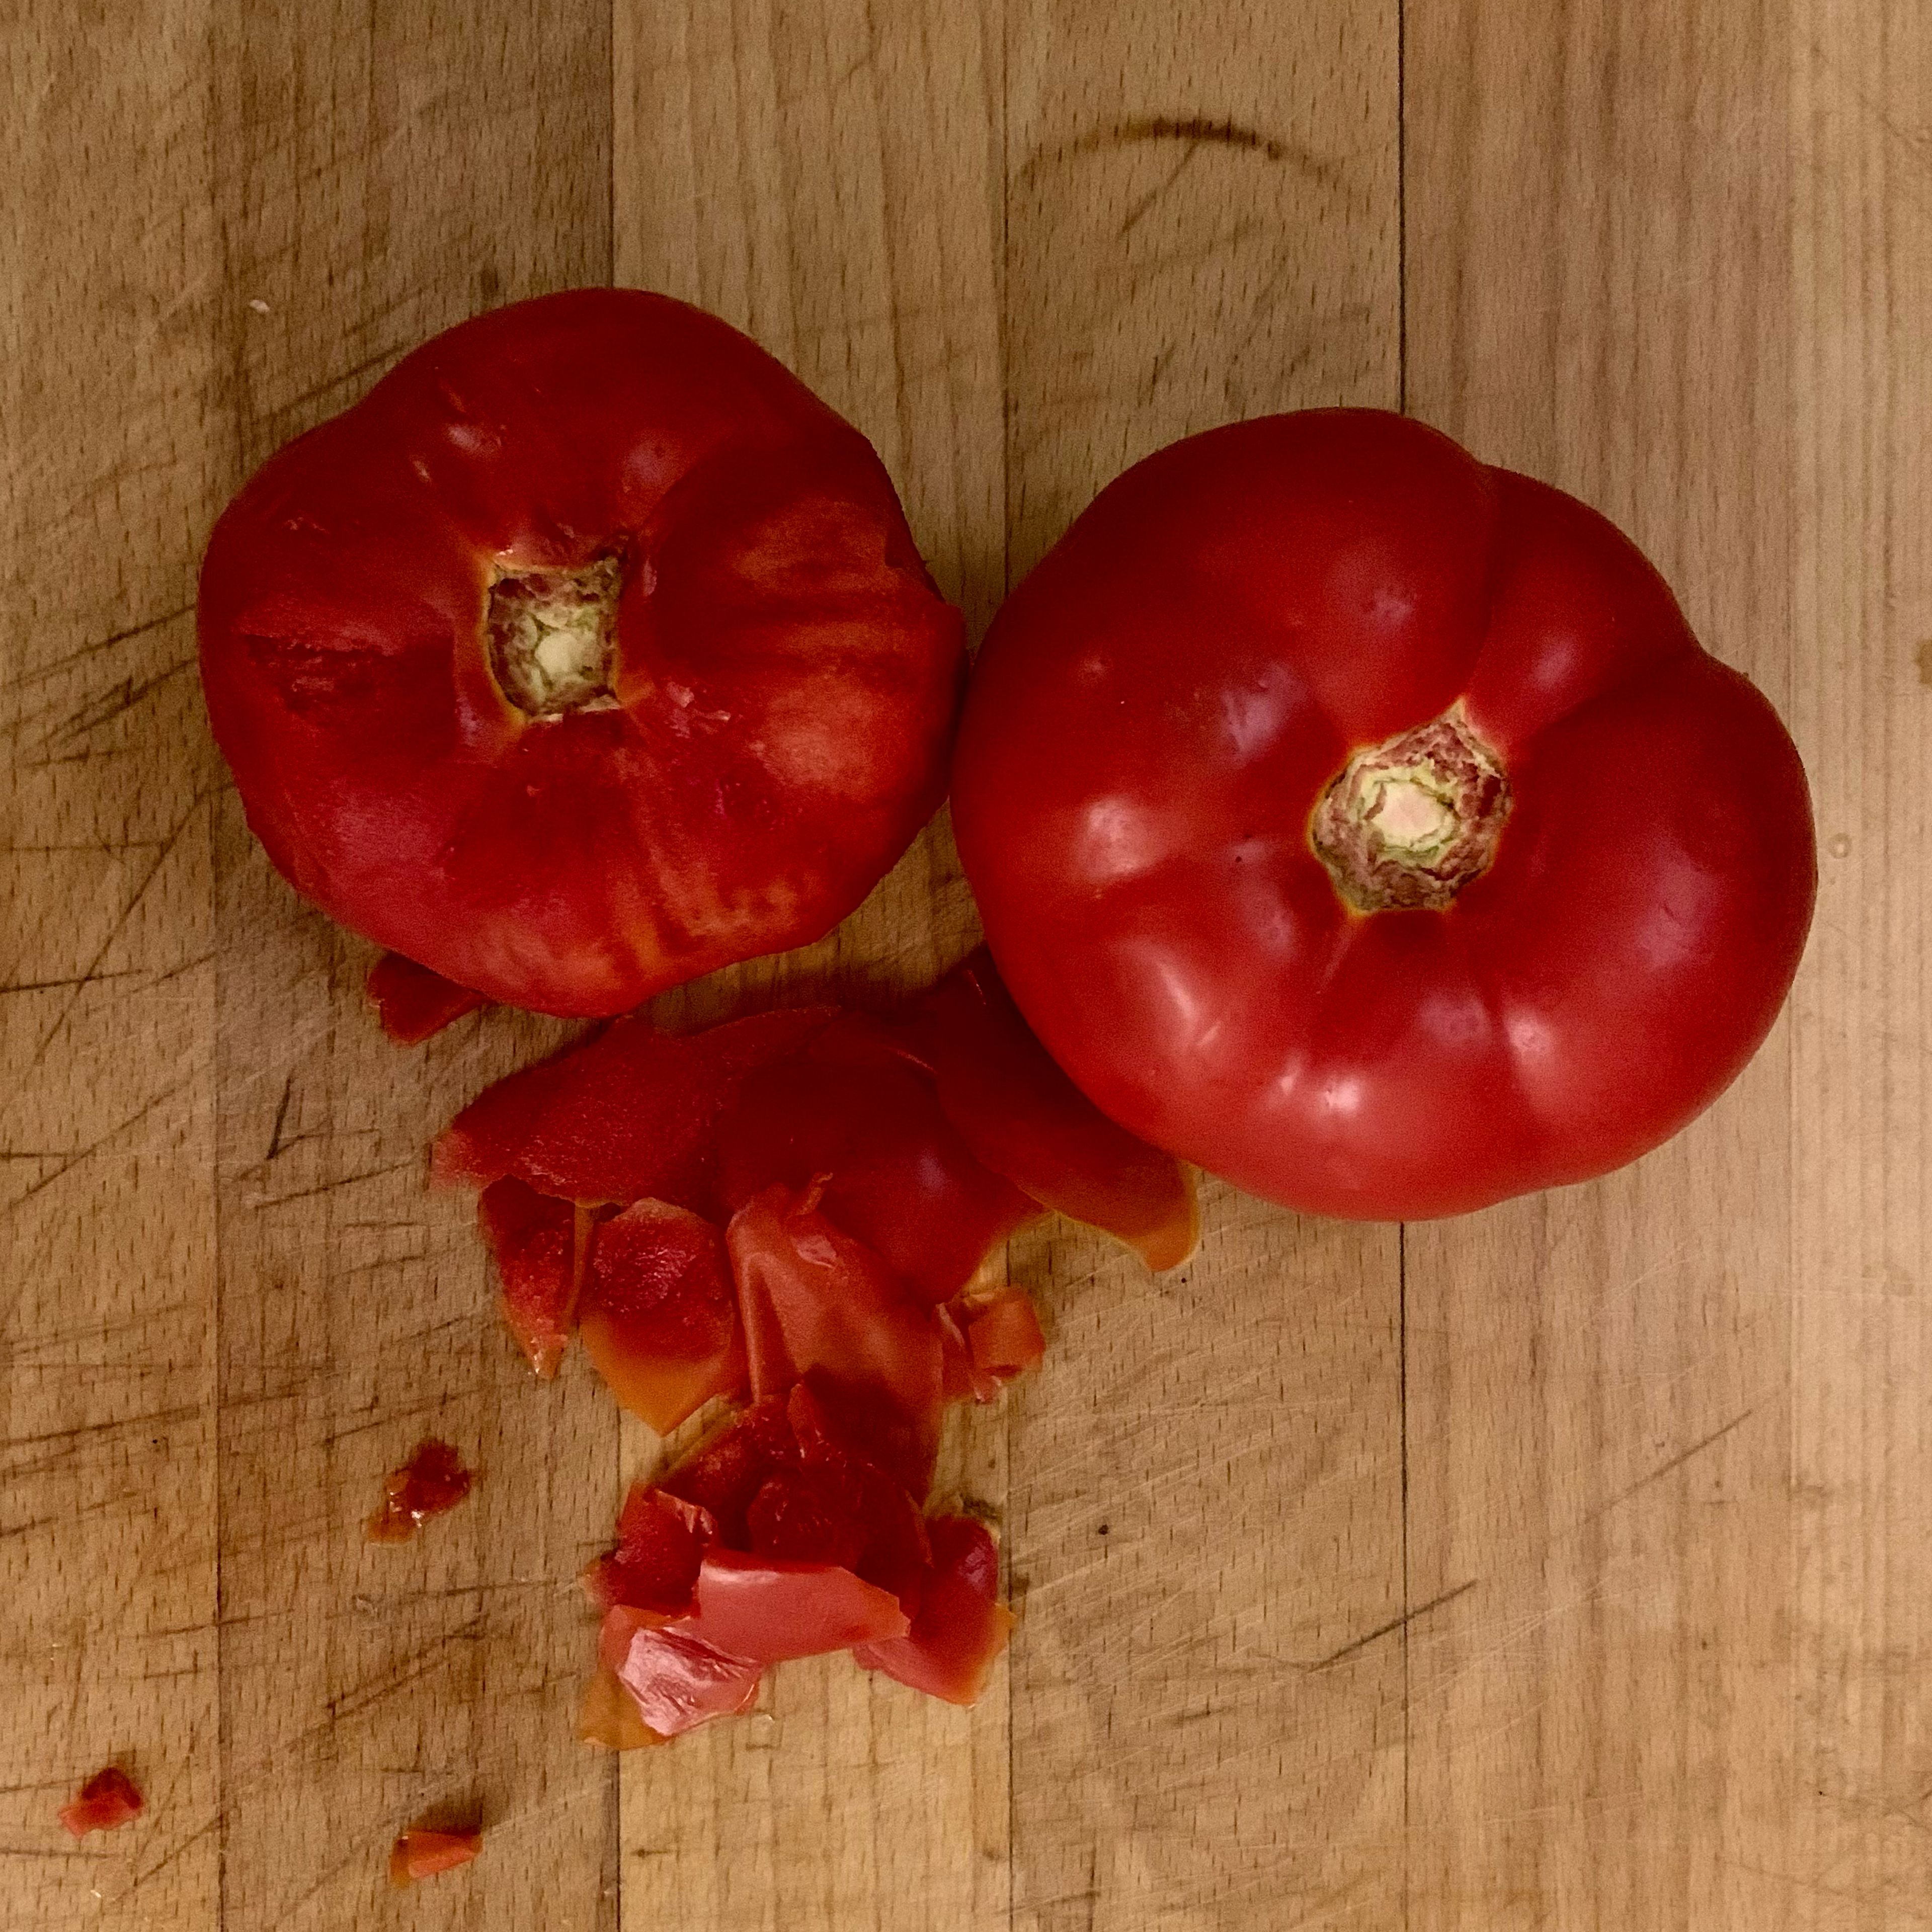 While the bread is getting ready, we’ll Peeloff the tomatoes to avoid those small pieces after blending. (If you’re short of time you can skip this step, will be just as delicious, just blend a little bit more)